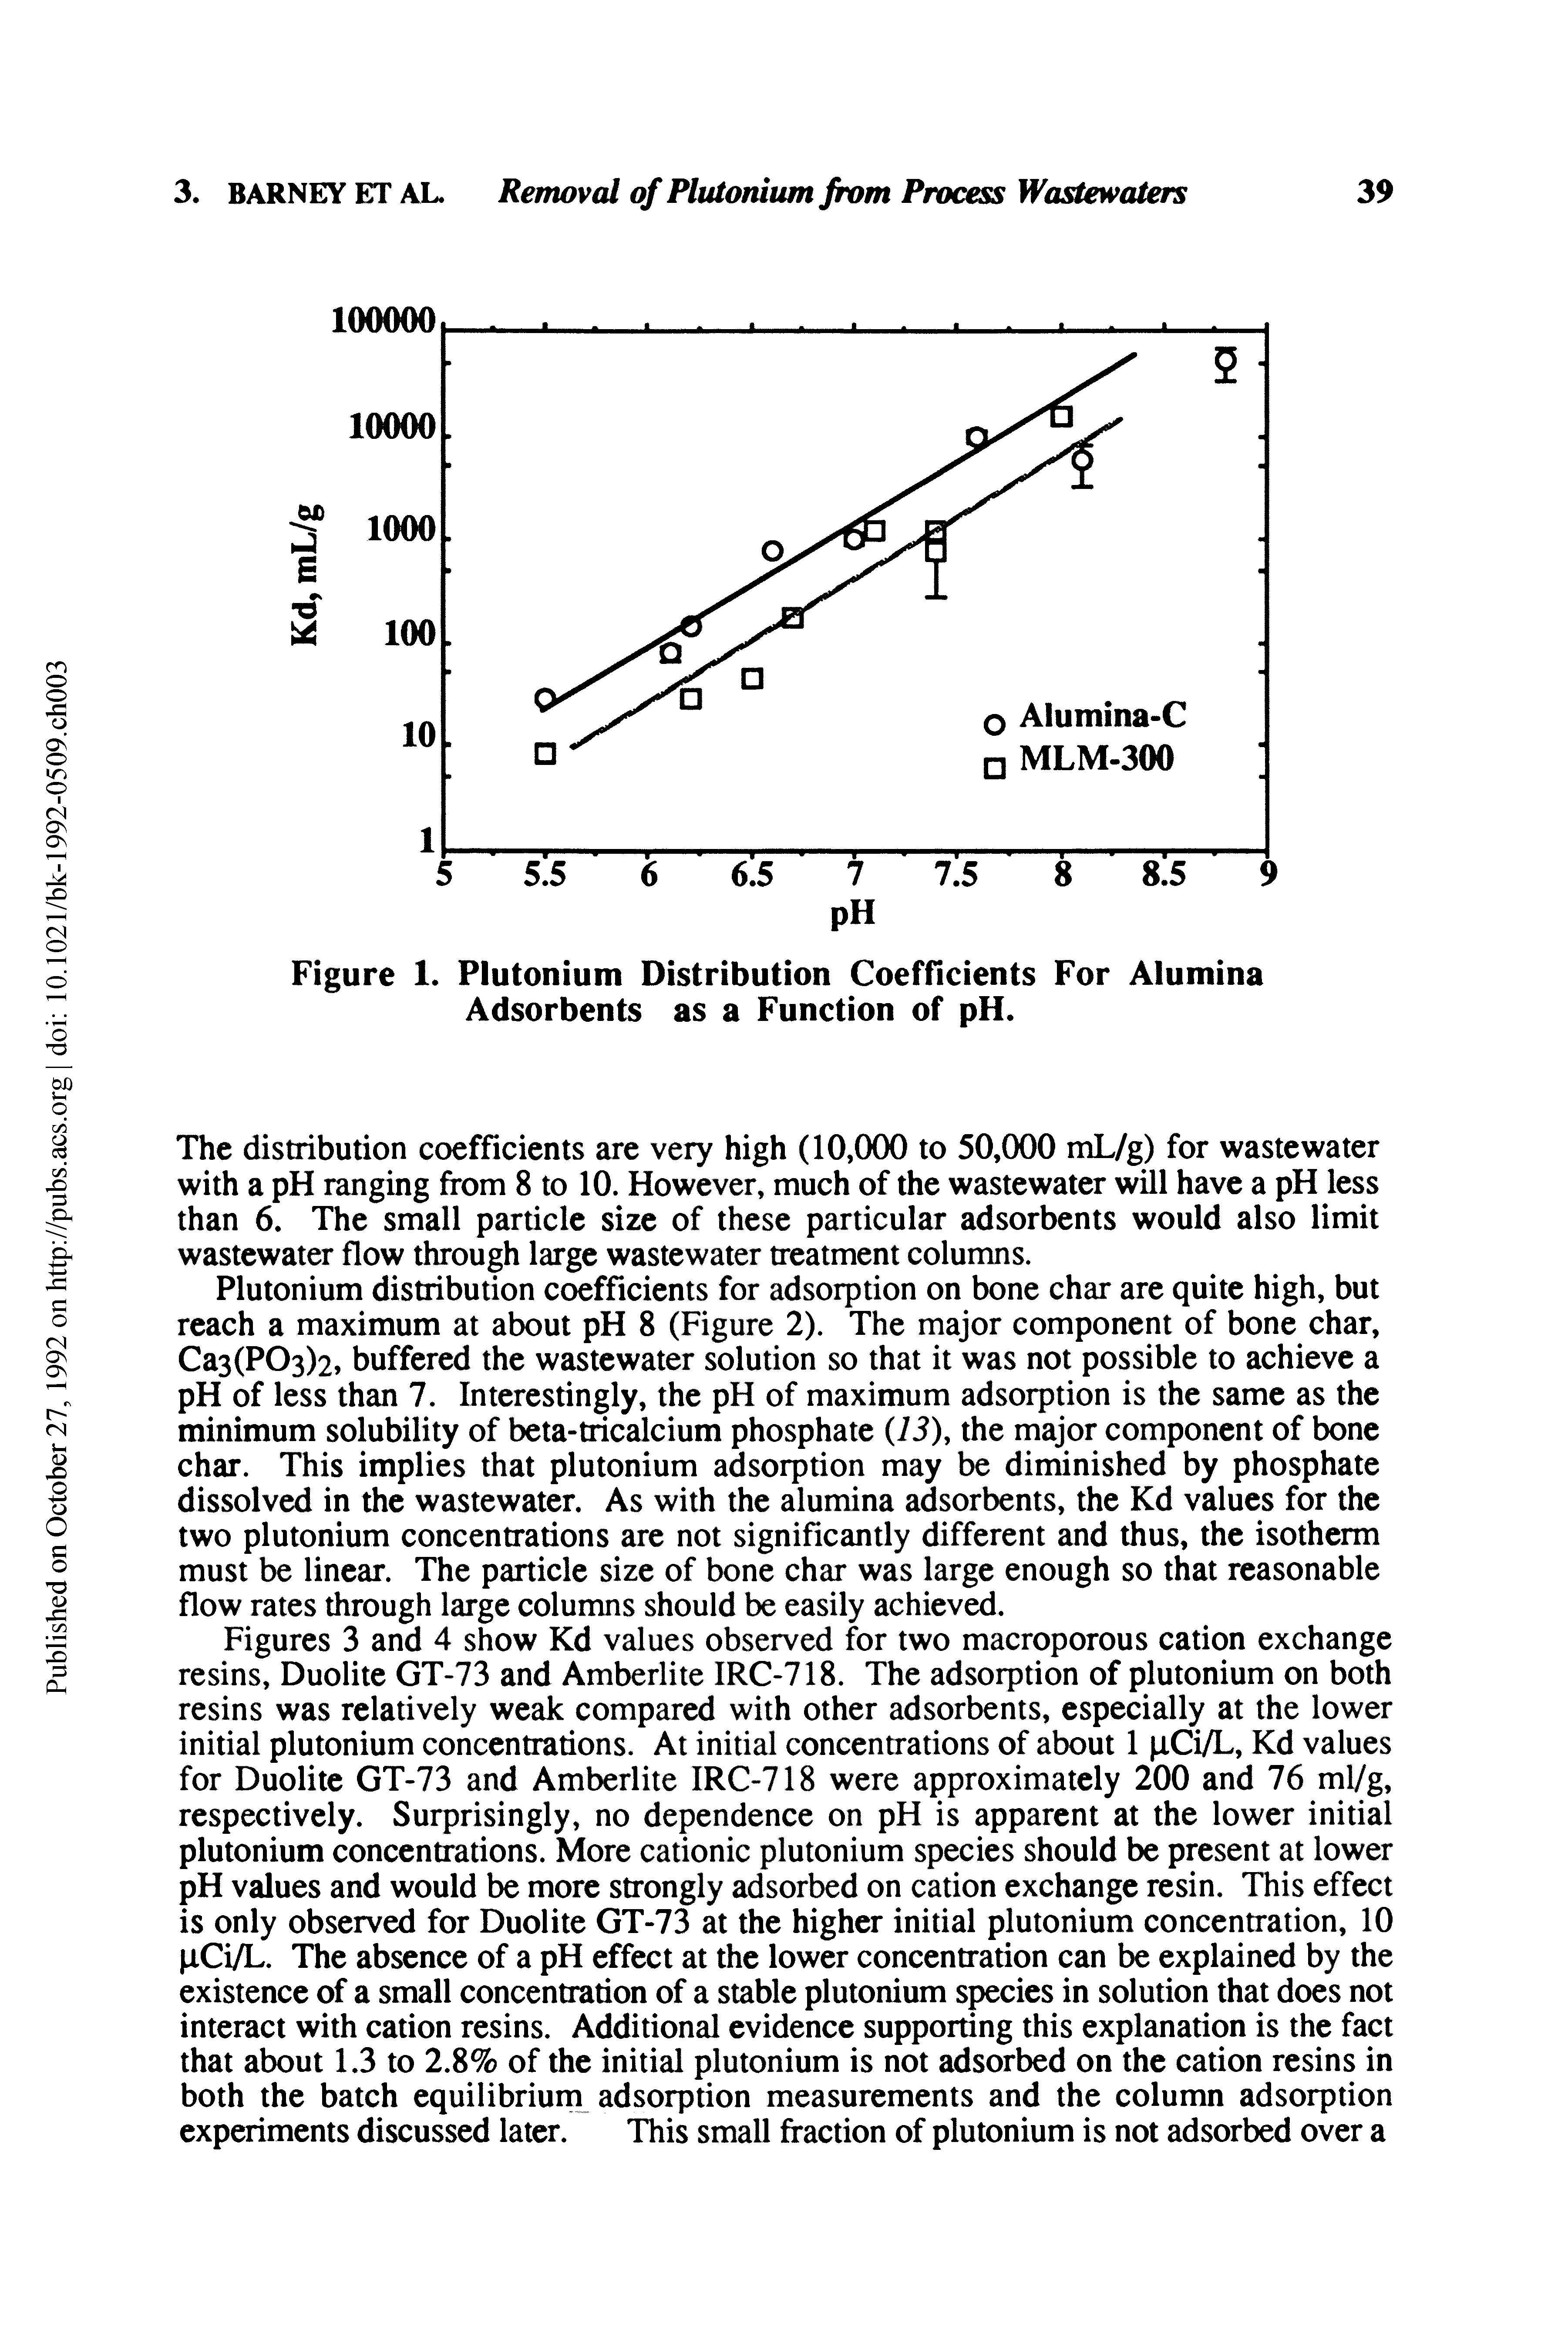 Figures 3 and 4 show Kd values observed for two macroporous cation exchange resins, Duolite GT-73 and Amberlite IRC-718. The adsorption of plutonium on both resins was relatively weak compared with other adsorbents, especially at the lower initial plutonium concentrations. At initial concentrations of about 1 pCi/L, Kd values for Duolite GT-73 and Amberlite IRC-718 were approximately 200 and 76 ml/g, respectively. Surprisingly, no dependence on pH is apparent at the lower initial plutonium concentrations. More cationic plutonium species should be present at lower pH values and would be more strongly adsorbed on cation exchange resin. This effect is only observed for Duolite GT-73 at the higher initial plutonium concentration, 10 iCi/L. The absence of a pH effect at the lower concentration can be explained by the existence of a small concentration of a stable plutonium species in solution that does not interact with cation resins. Additional evidence supporting this explanation is the fact that about 1.3 to 2.8% of the initial plutonium is not adsorbed on the cation resins in both the batch equilibrium adsorption measurements and the column adsorption experiments discussed later. This small fraction of plutonium is not adsorbed over a...